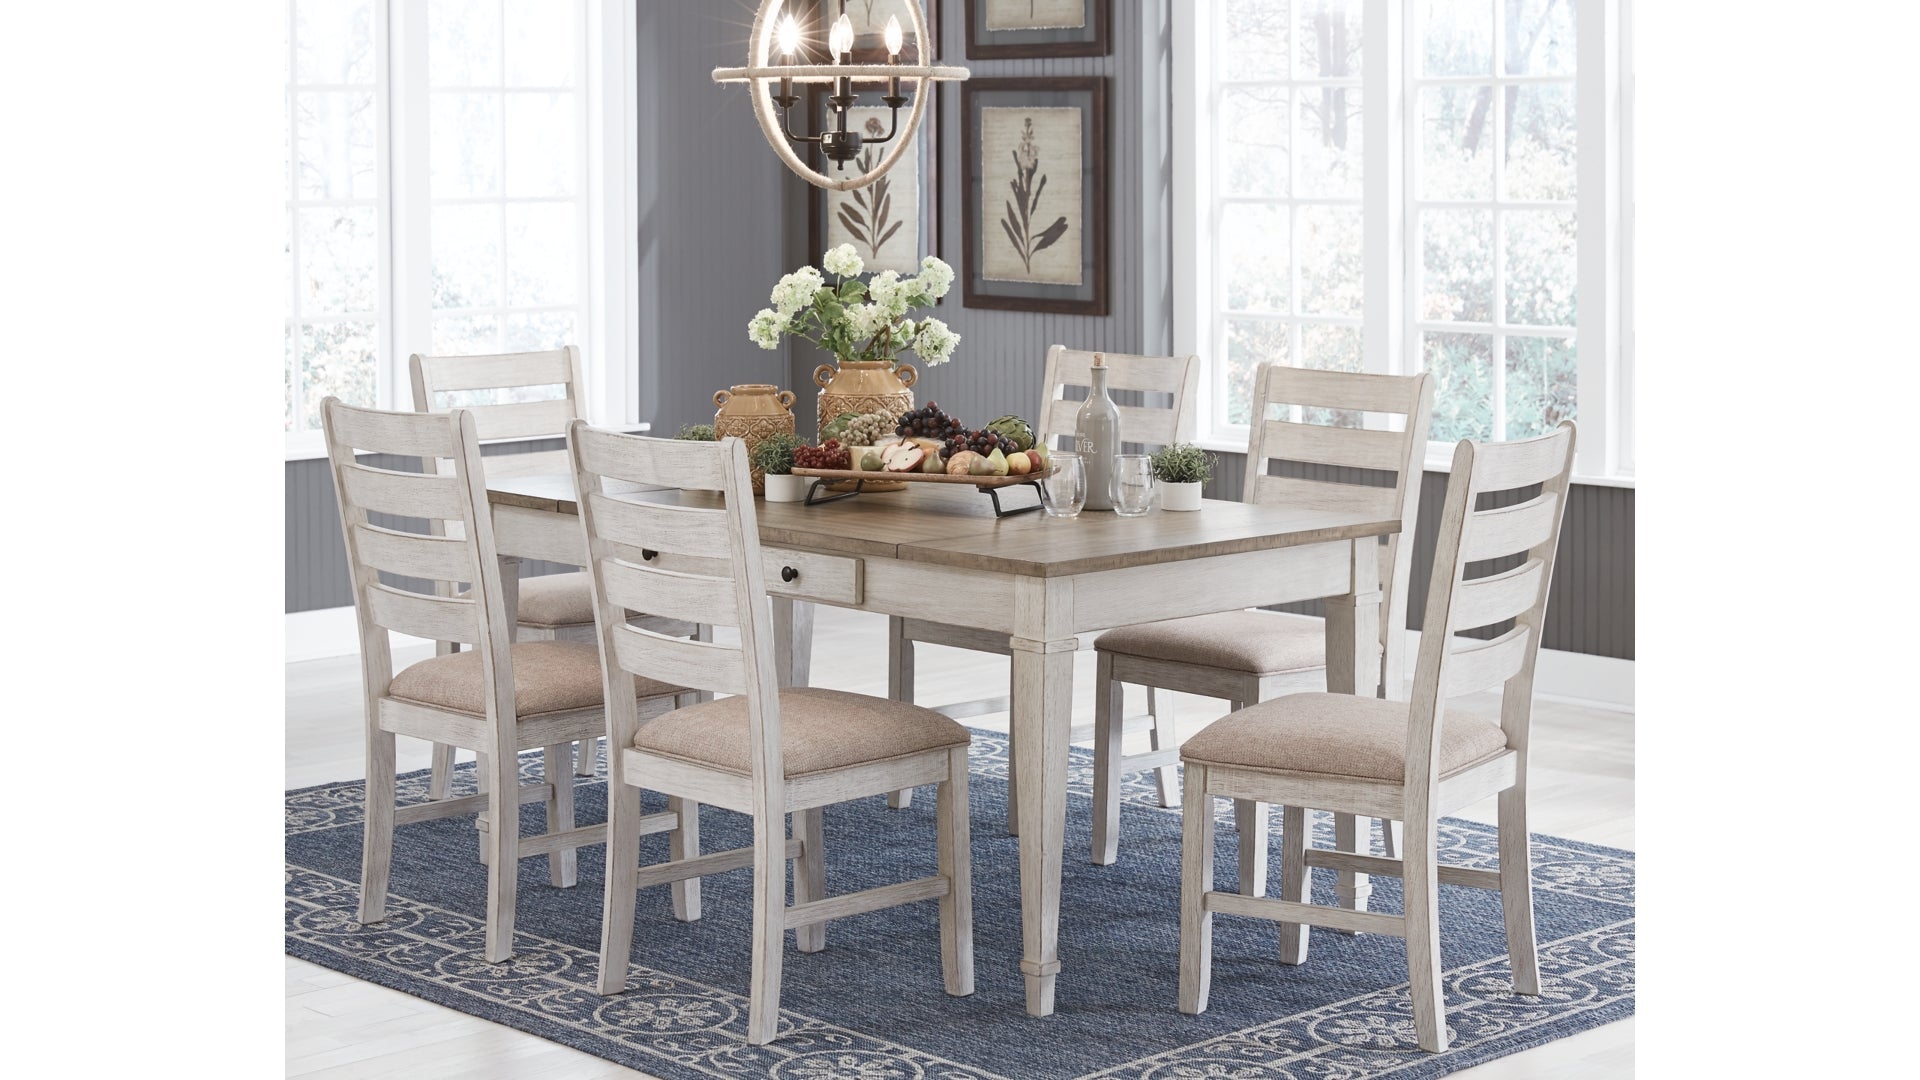 Skempton Dining Table and 6 Chairs